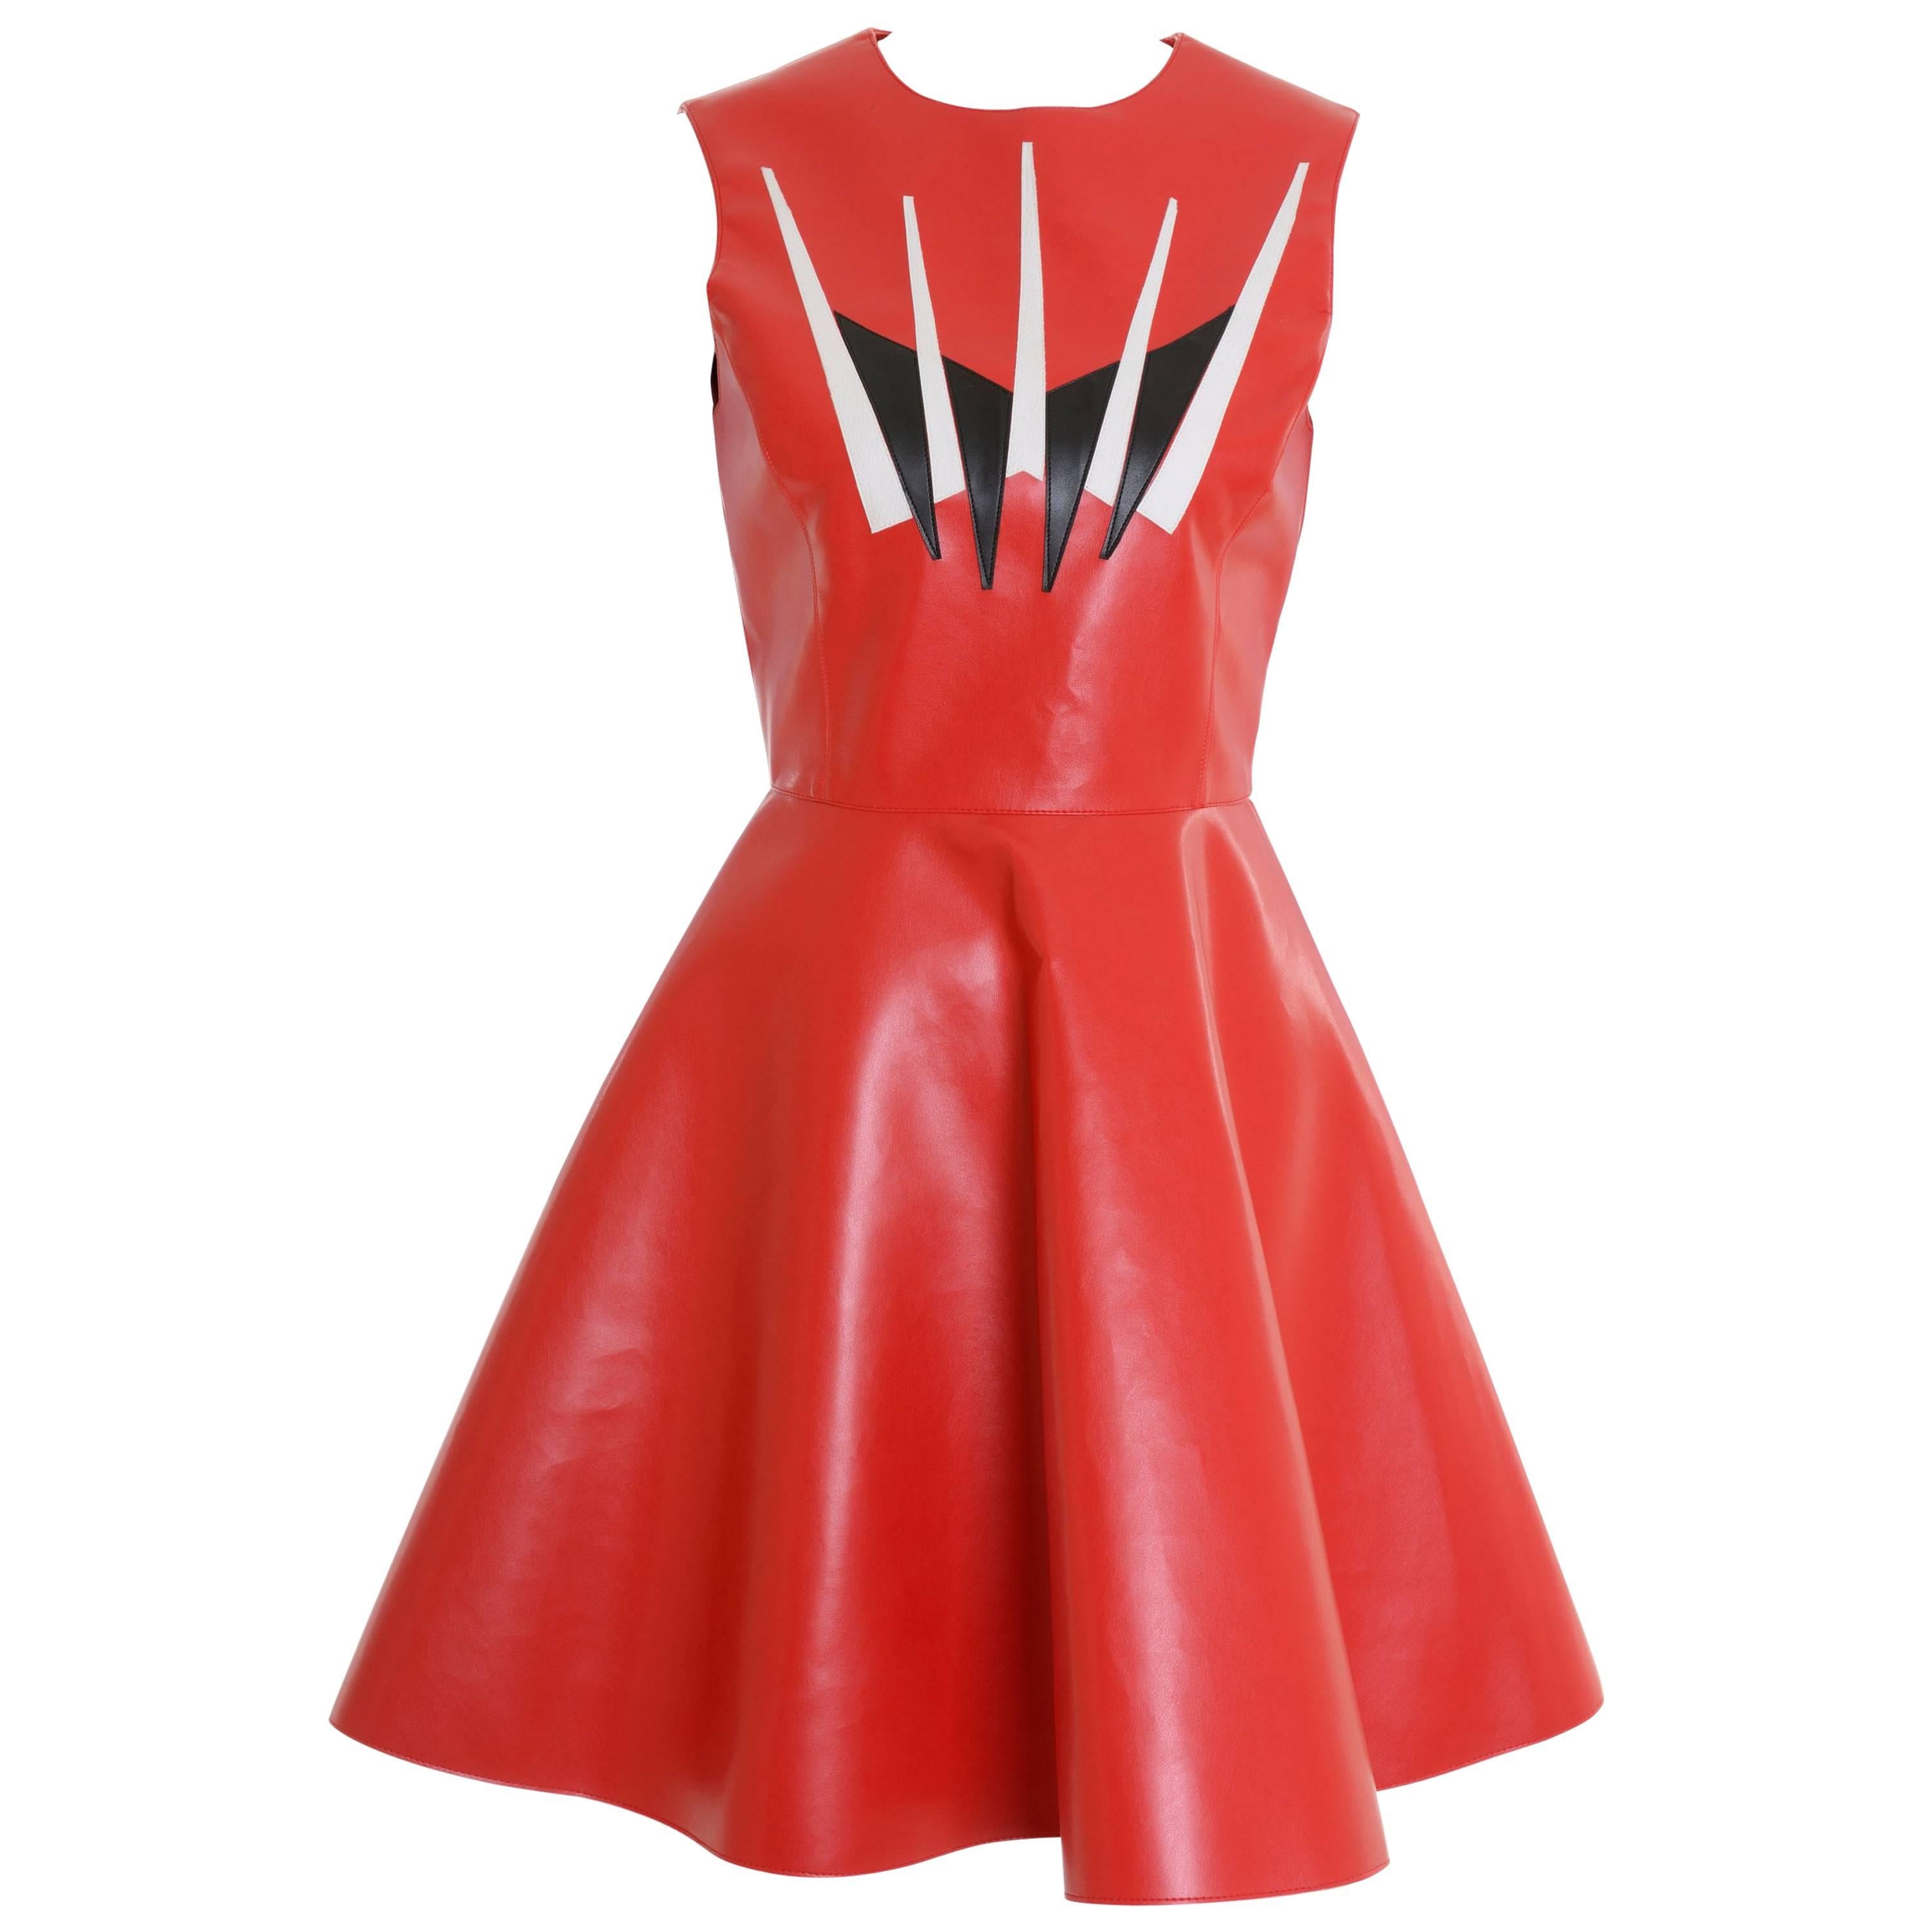 DOMENICO CIOFFI Made in Italy Red Vinyl Leather Mini Dress For Sale